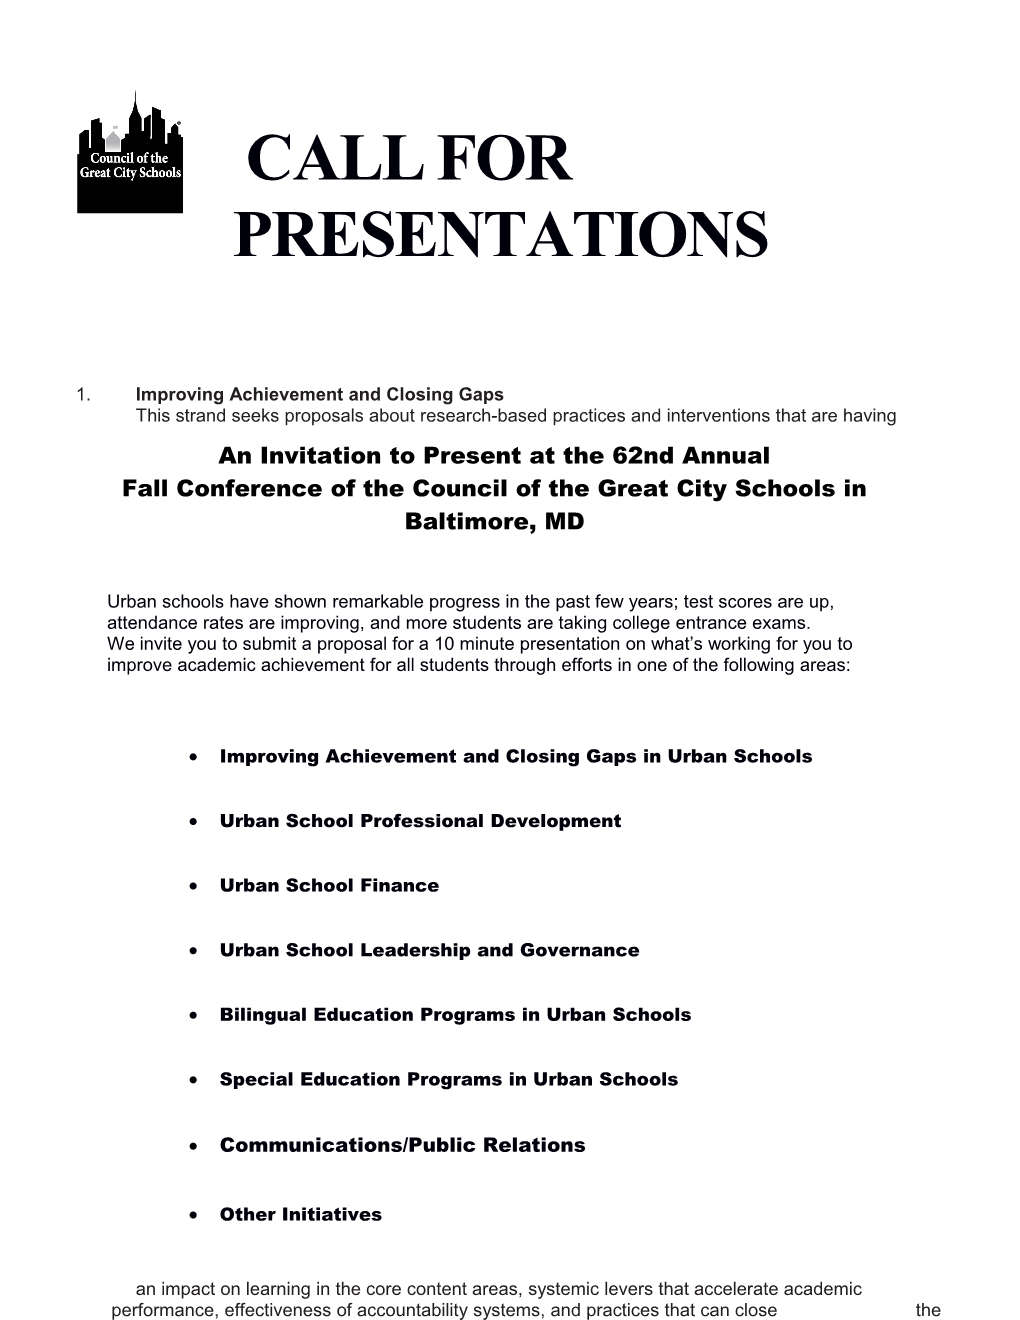 An Invitation to Present at the 62Nd Annual Fall Conference of the Council of the Great